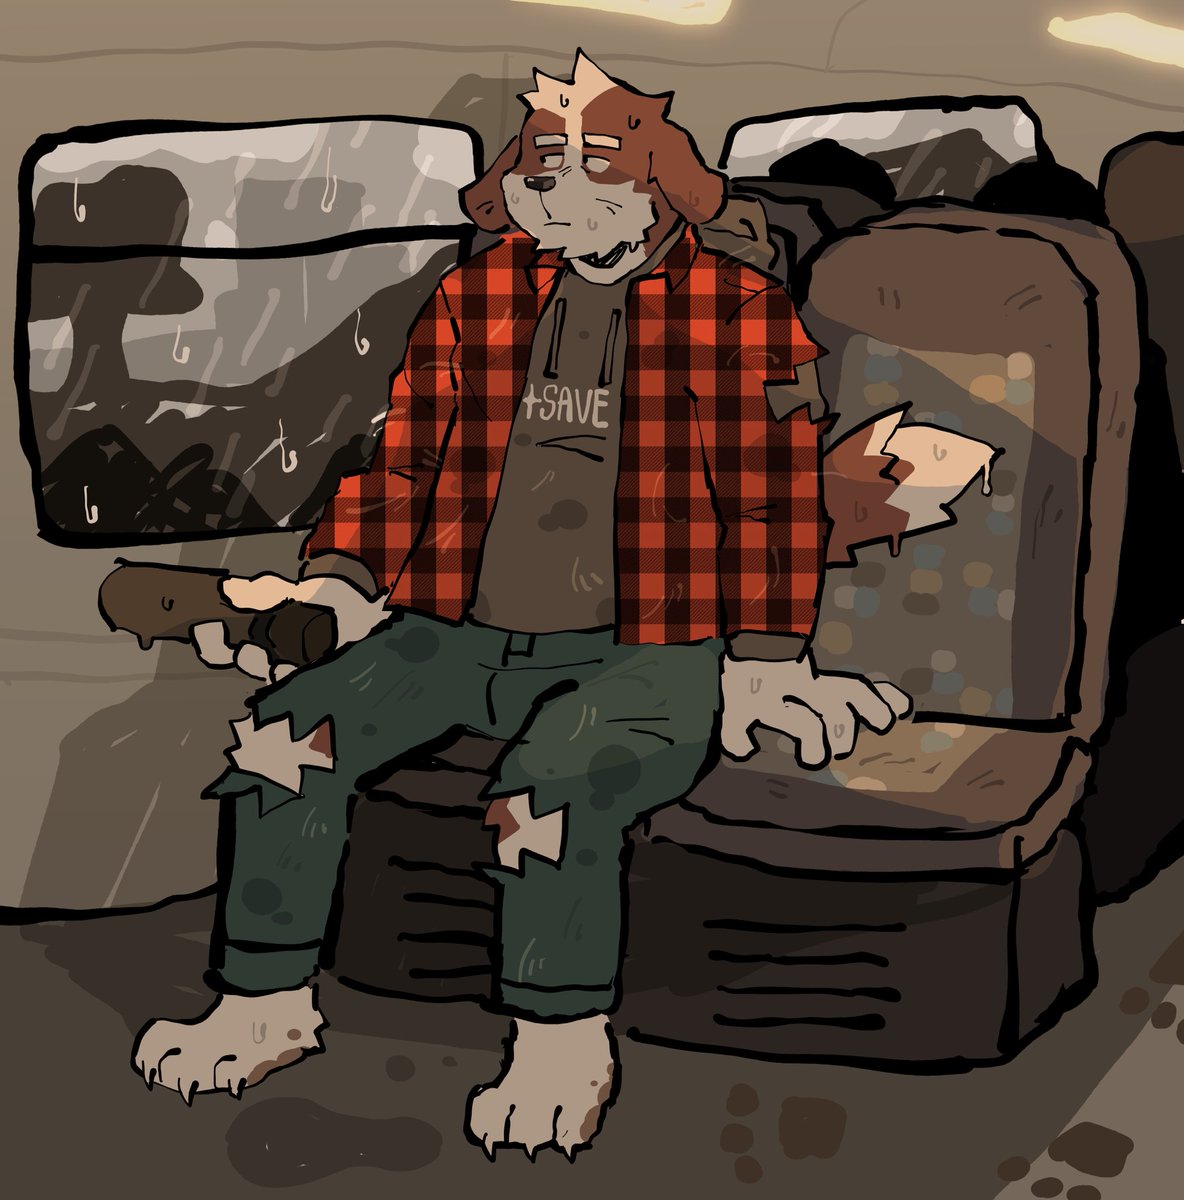 wanted to repost this old drawing of lincoln on the merseyrail train on a rainy day. muddy paws